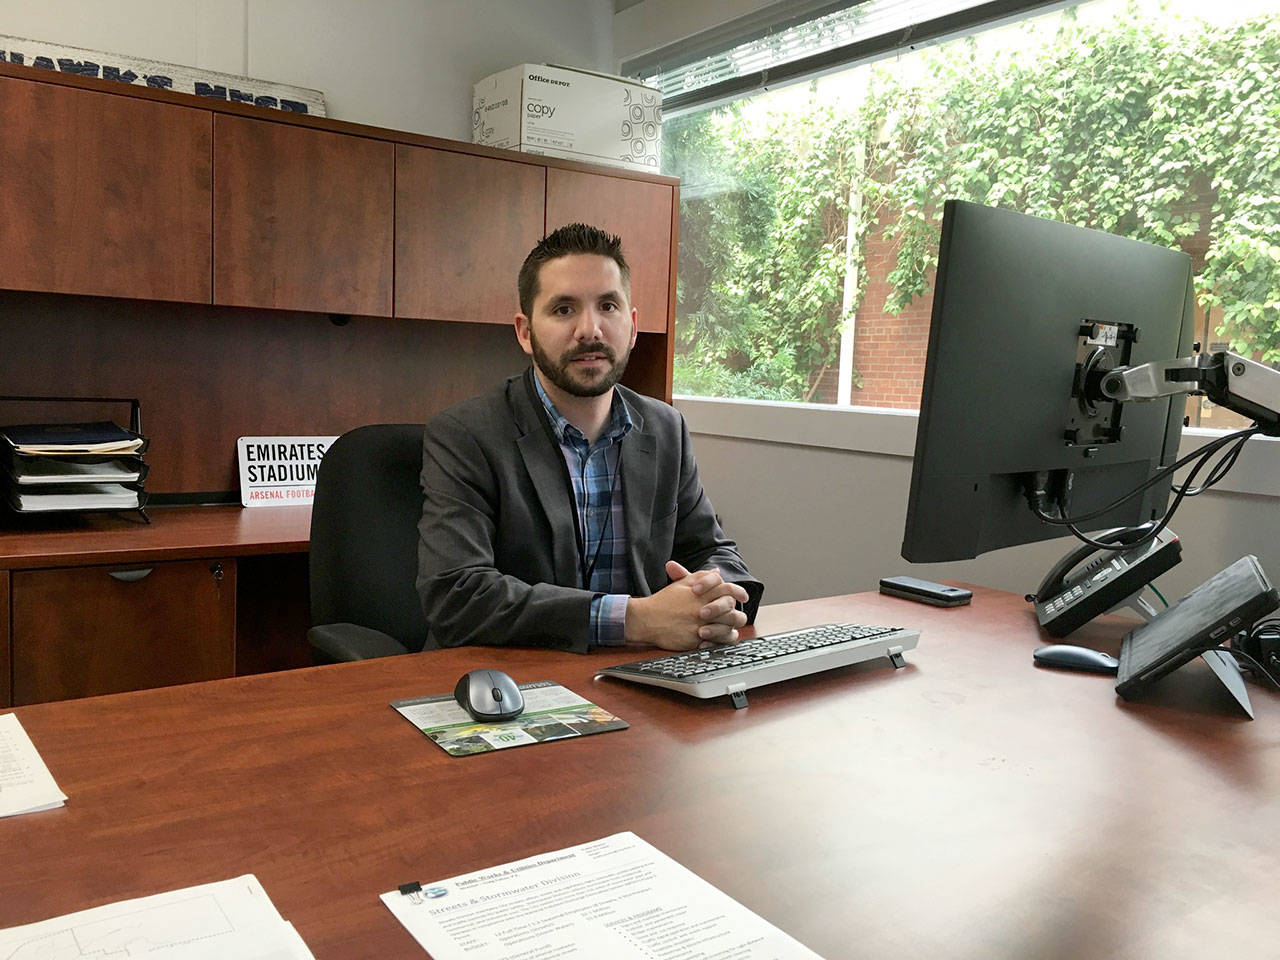 Port Angeles Public Works and Utilities Director Thomas Hunter in his new office at Port Angeles CIty Hall. (Rob Ollikainen/Peninsula Daily News)